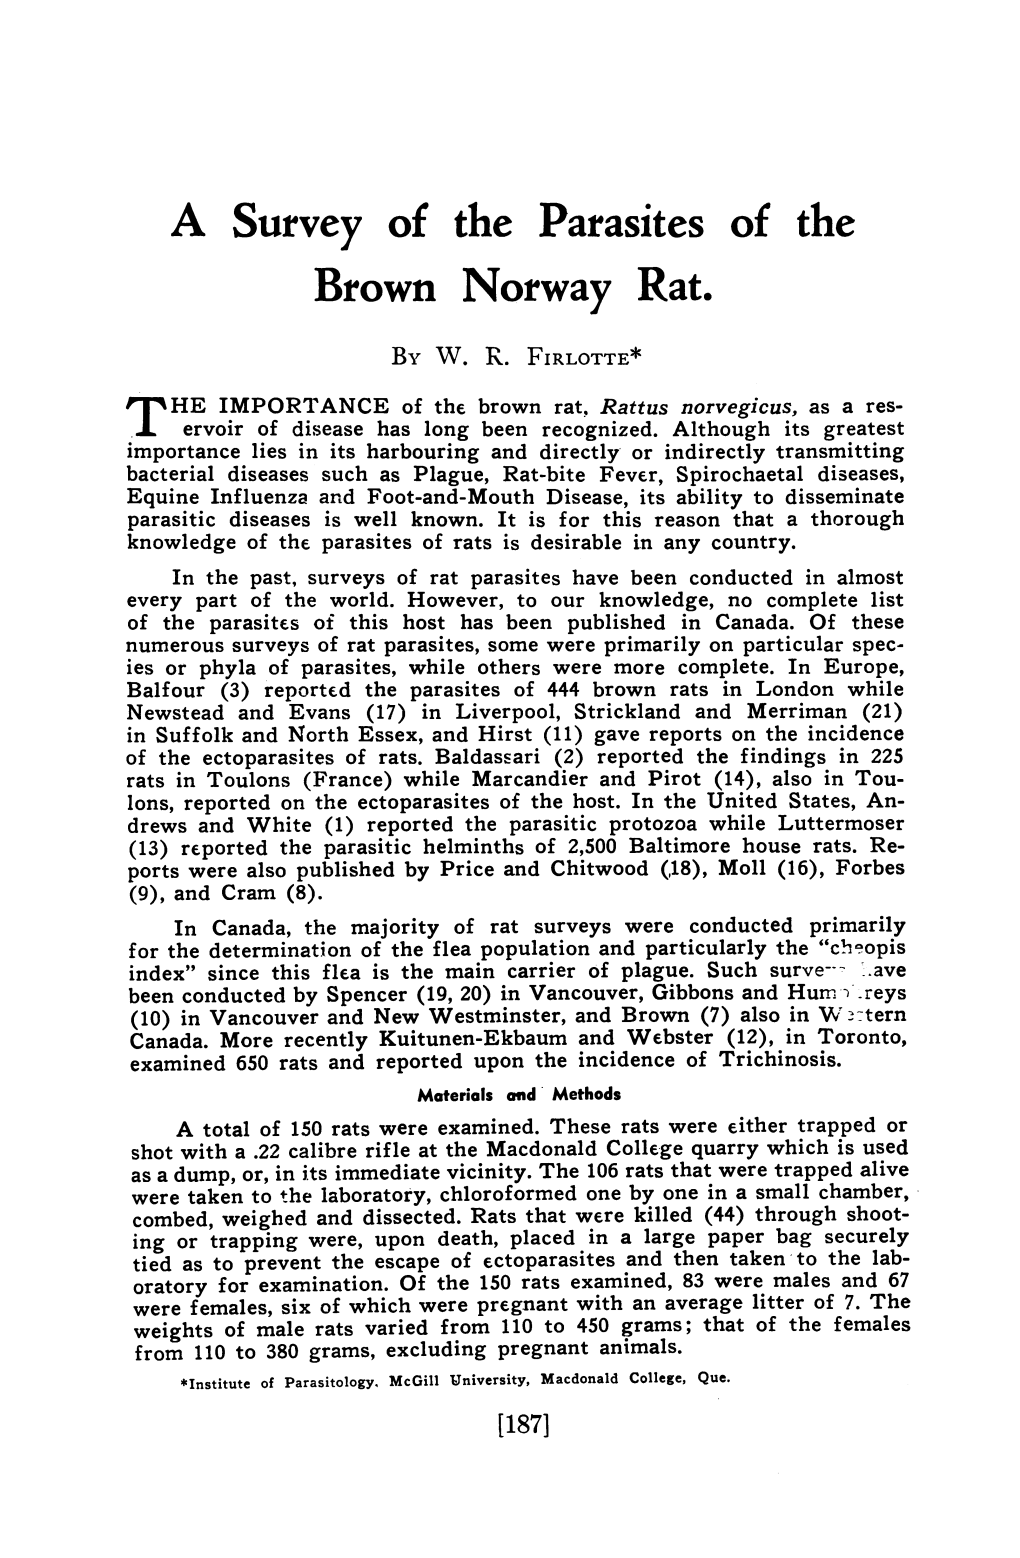 A Survey of the Parasites of the Brown Norway Rat. by W